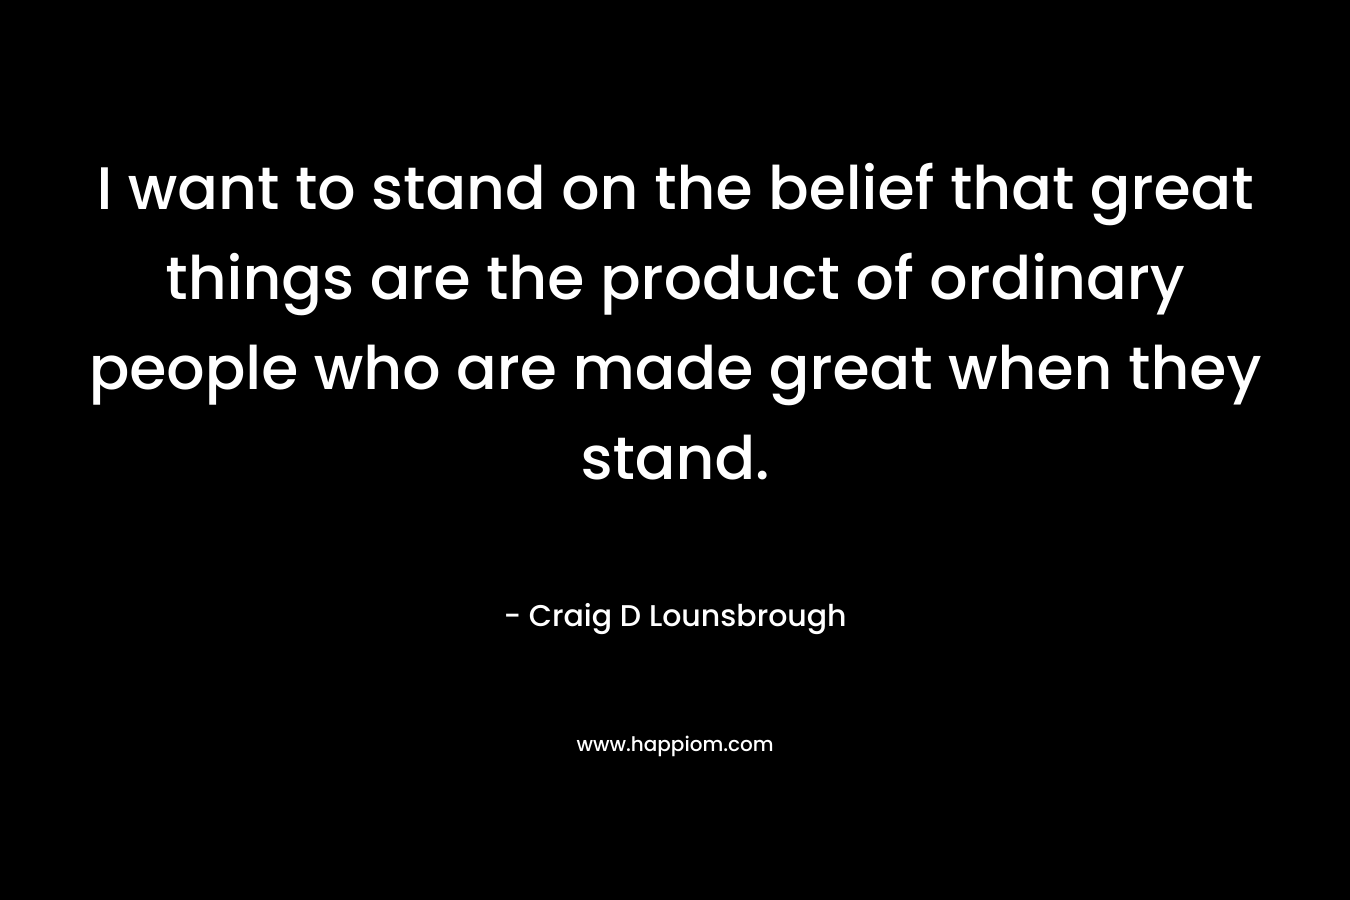 I want to stand on the belief that great things are the product of ordinary people who are made great when they stand.